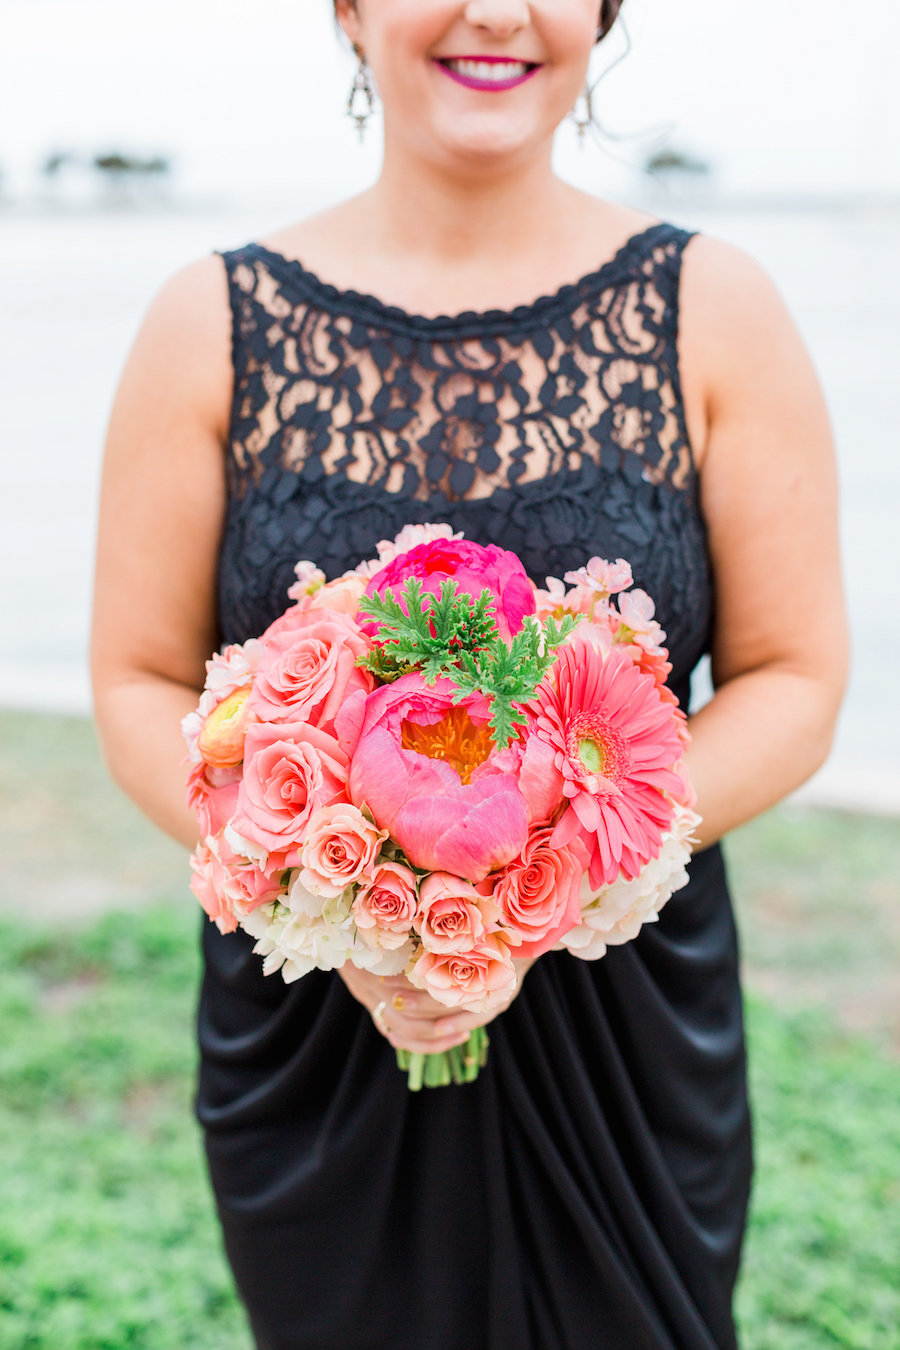 St. Pete Bridesmaid in Navy Blue Bridesmaids Dress and Bright Coral and Pink Wedding Bouquet of Flowers